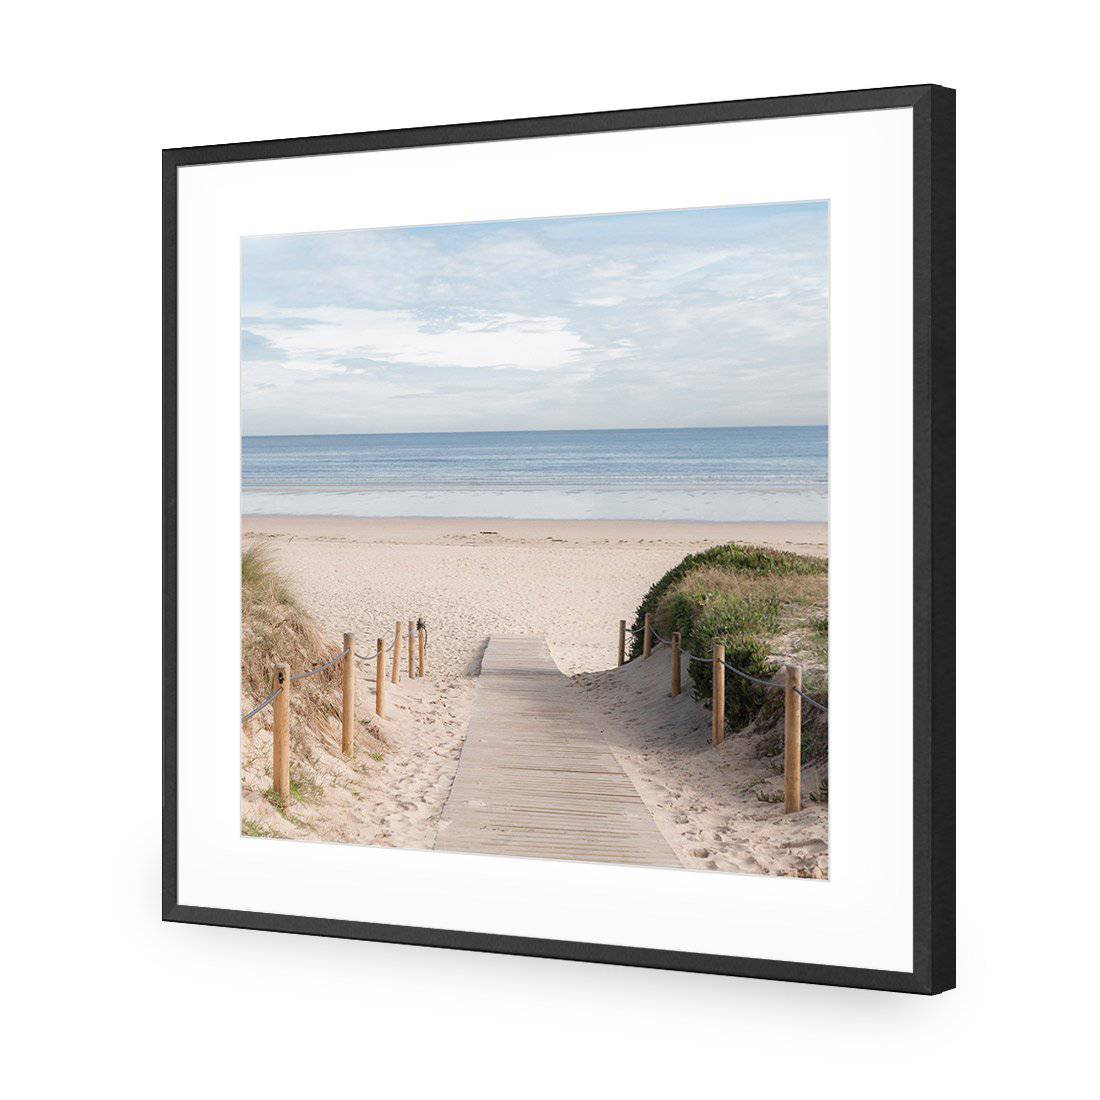 Pathway To The Sea, Square-Acrylic-Wall Art Design-With Border-Acrylic - Black Frame-37x37cm-Wall Art Designs